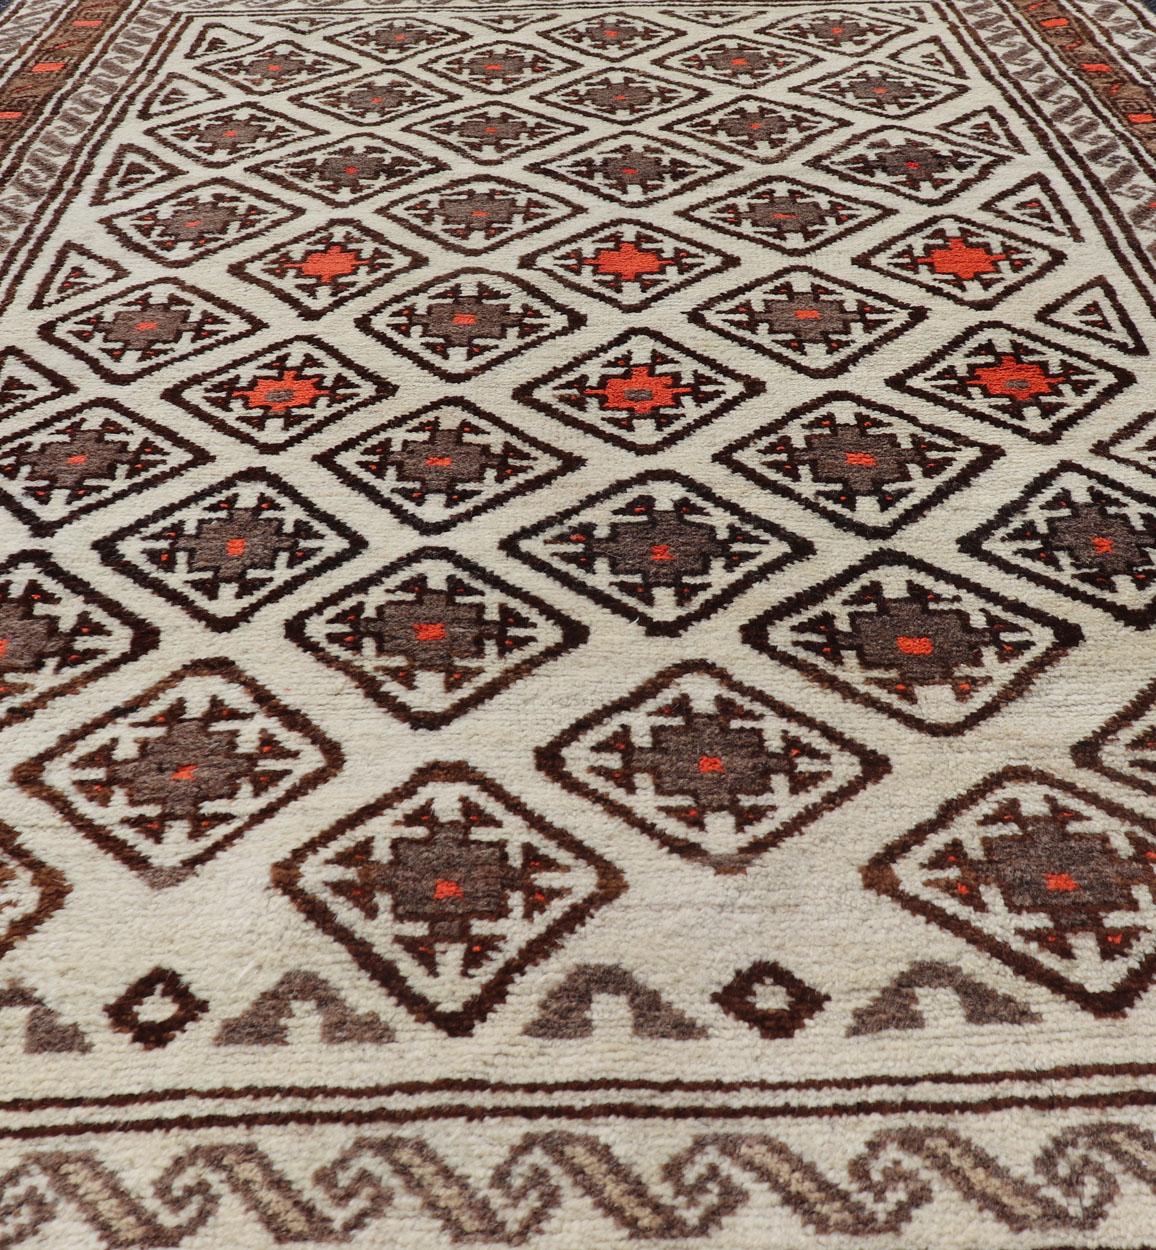 Antique Hand-Knotted Baluch Tribal Rug with All-Over Geometric Diamond Design For Sale 1